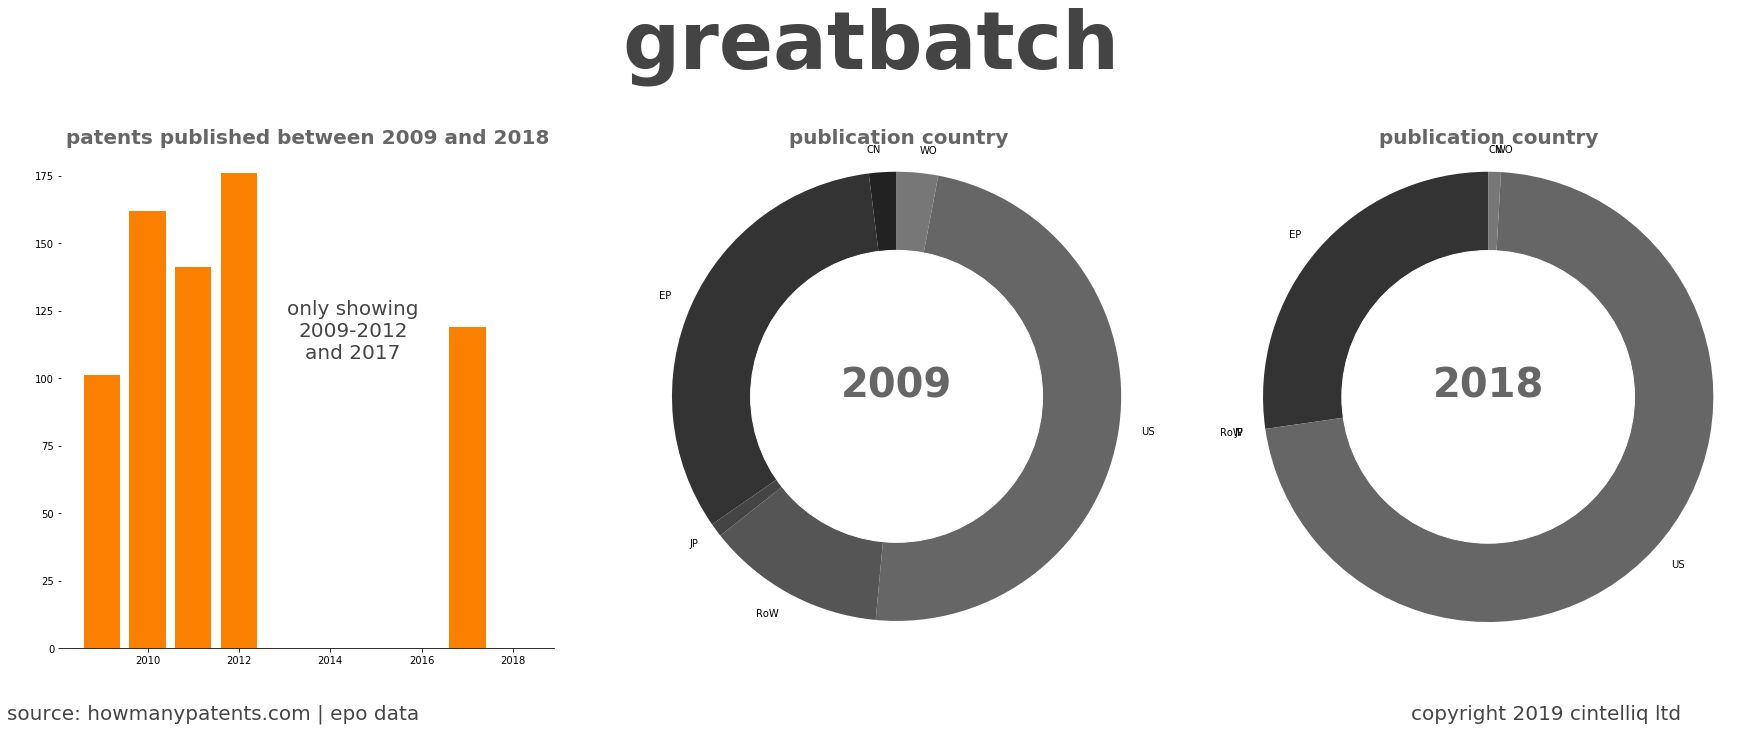 summary of patents for Greatbatch